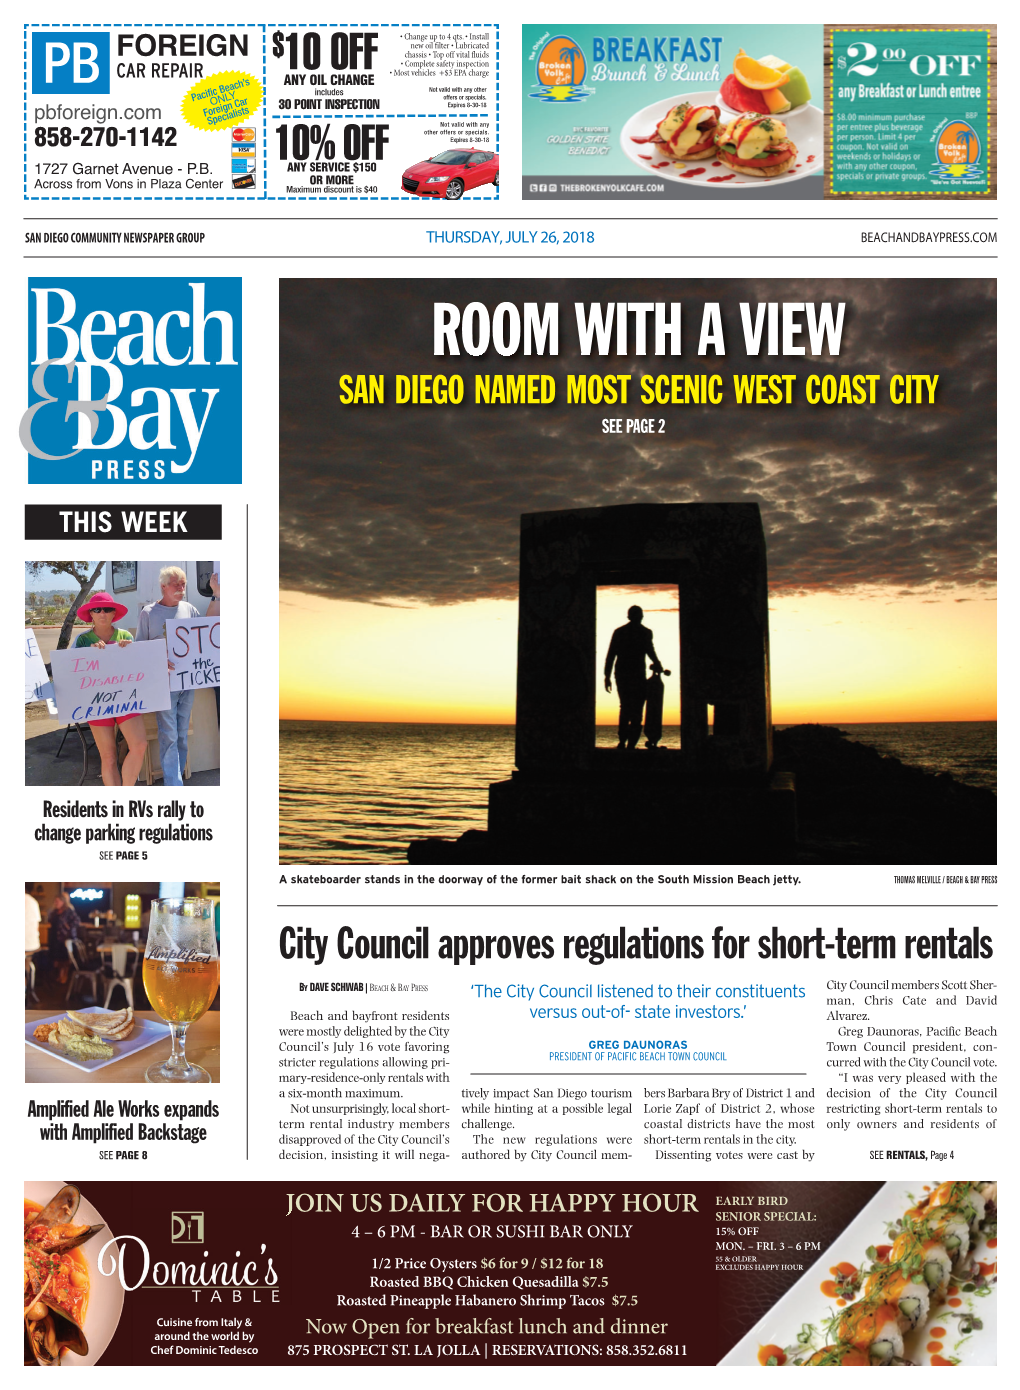 Room with a View San Diego Named Most Scenic West Coast City See Page 2